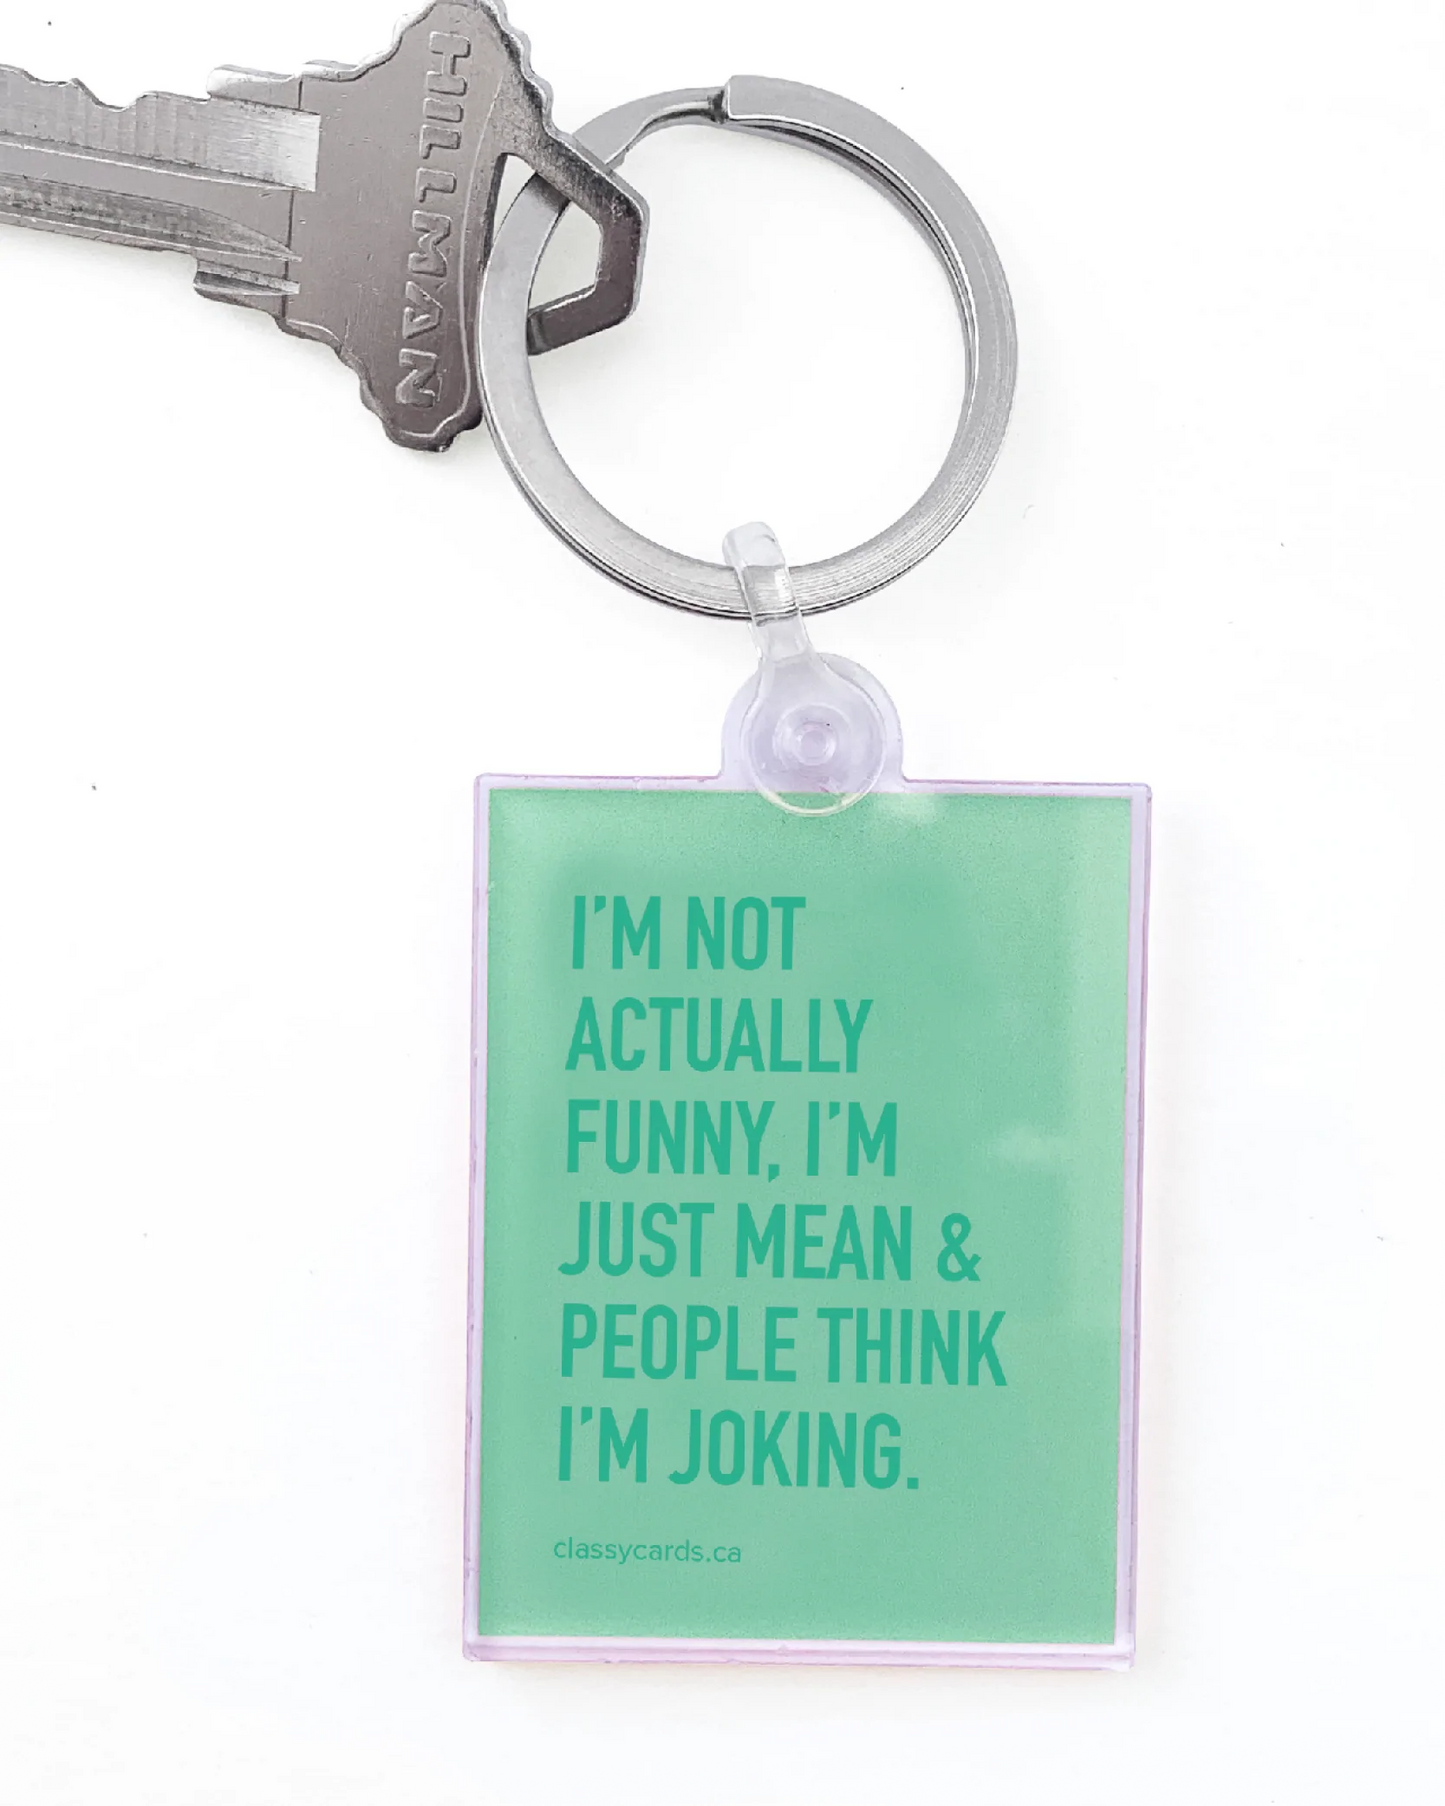 Classy Cards Funny Keychains